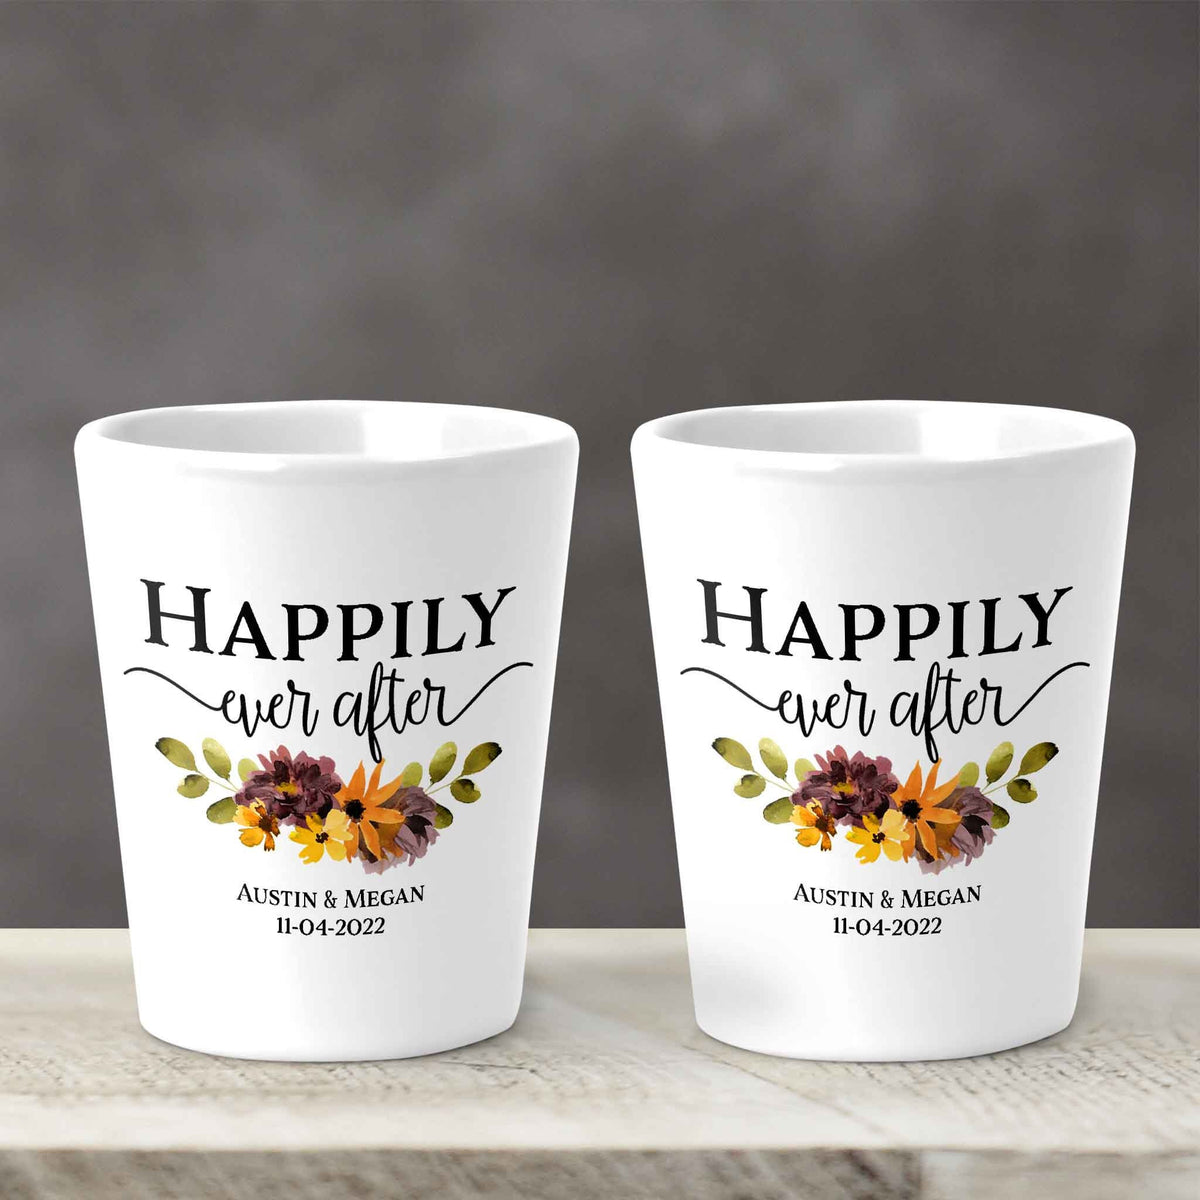 Custom Shot Glass | Personalized Shot Glass | Happily Ever After All Fall Floral